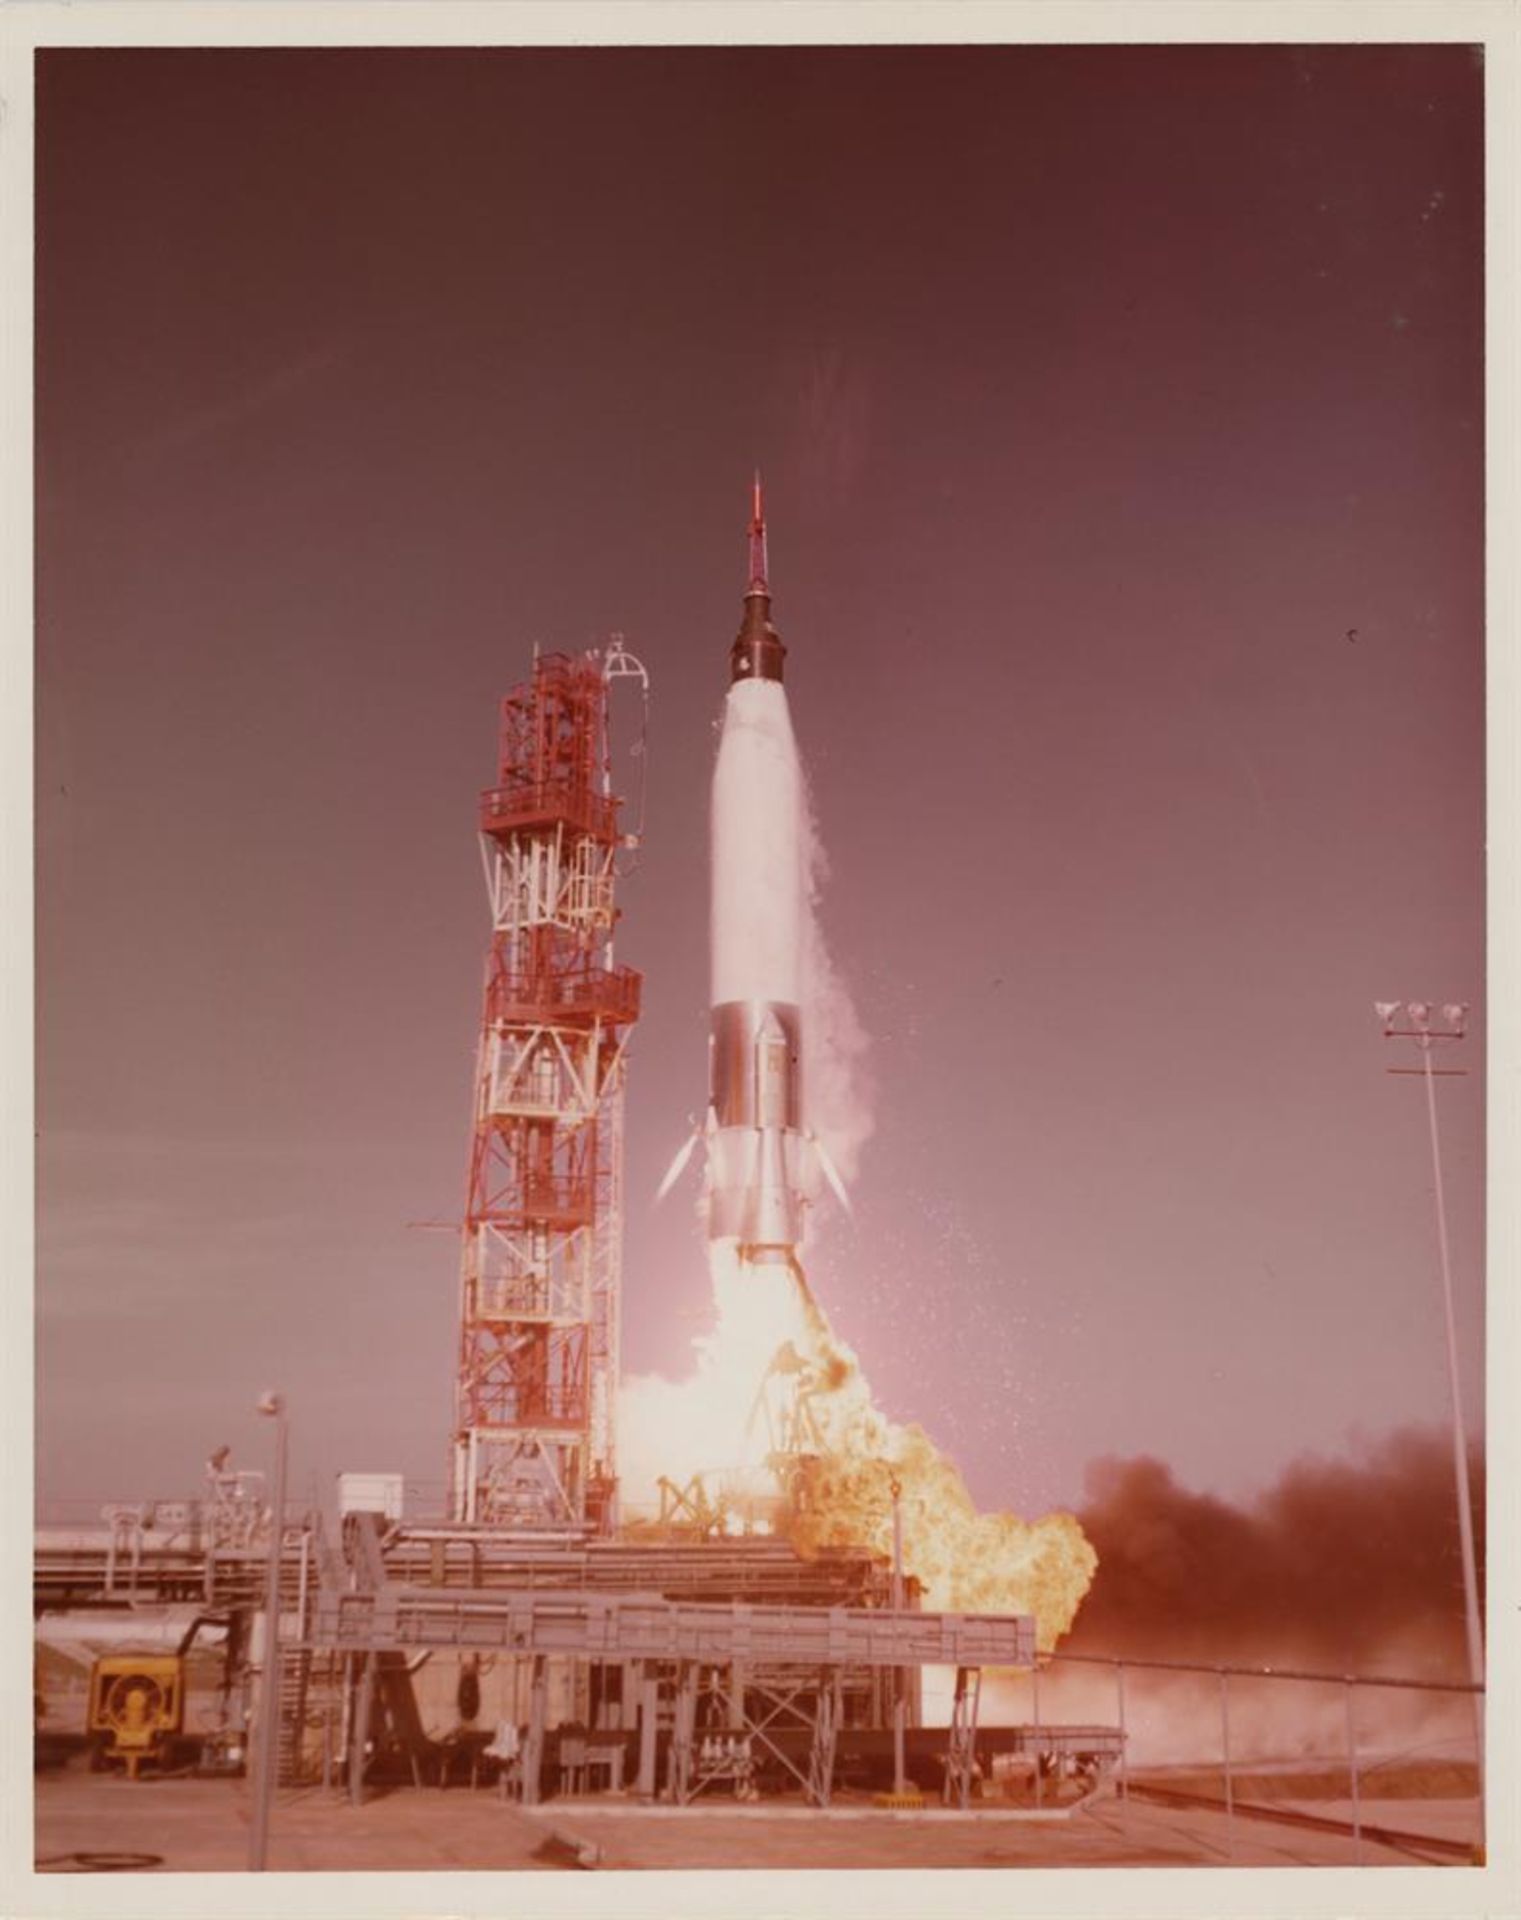 Launch of early unmanned test missions Mercury Atlas 2 and 5, 21 February and 29 November 1961 - Image 2 of 5